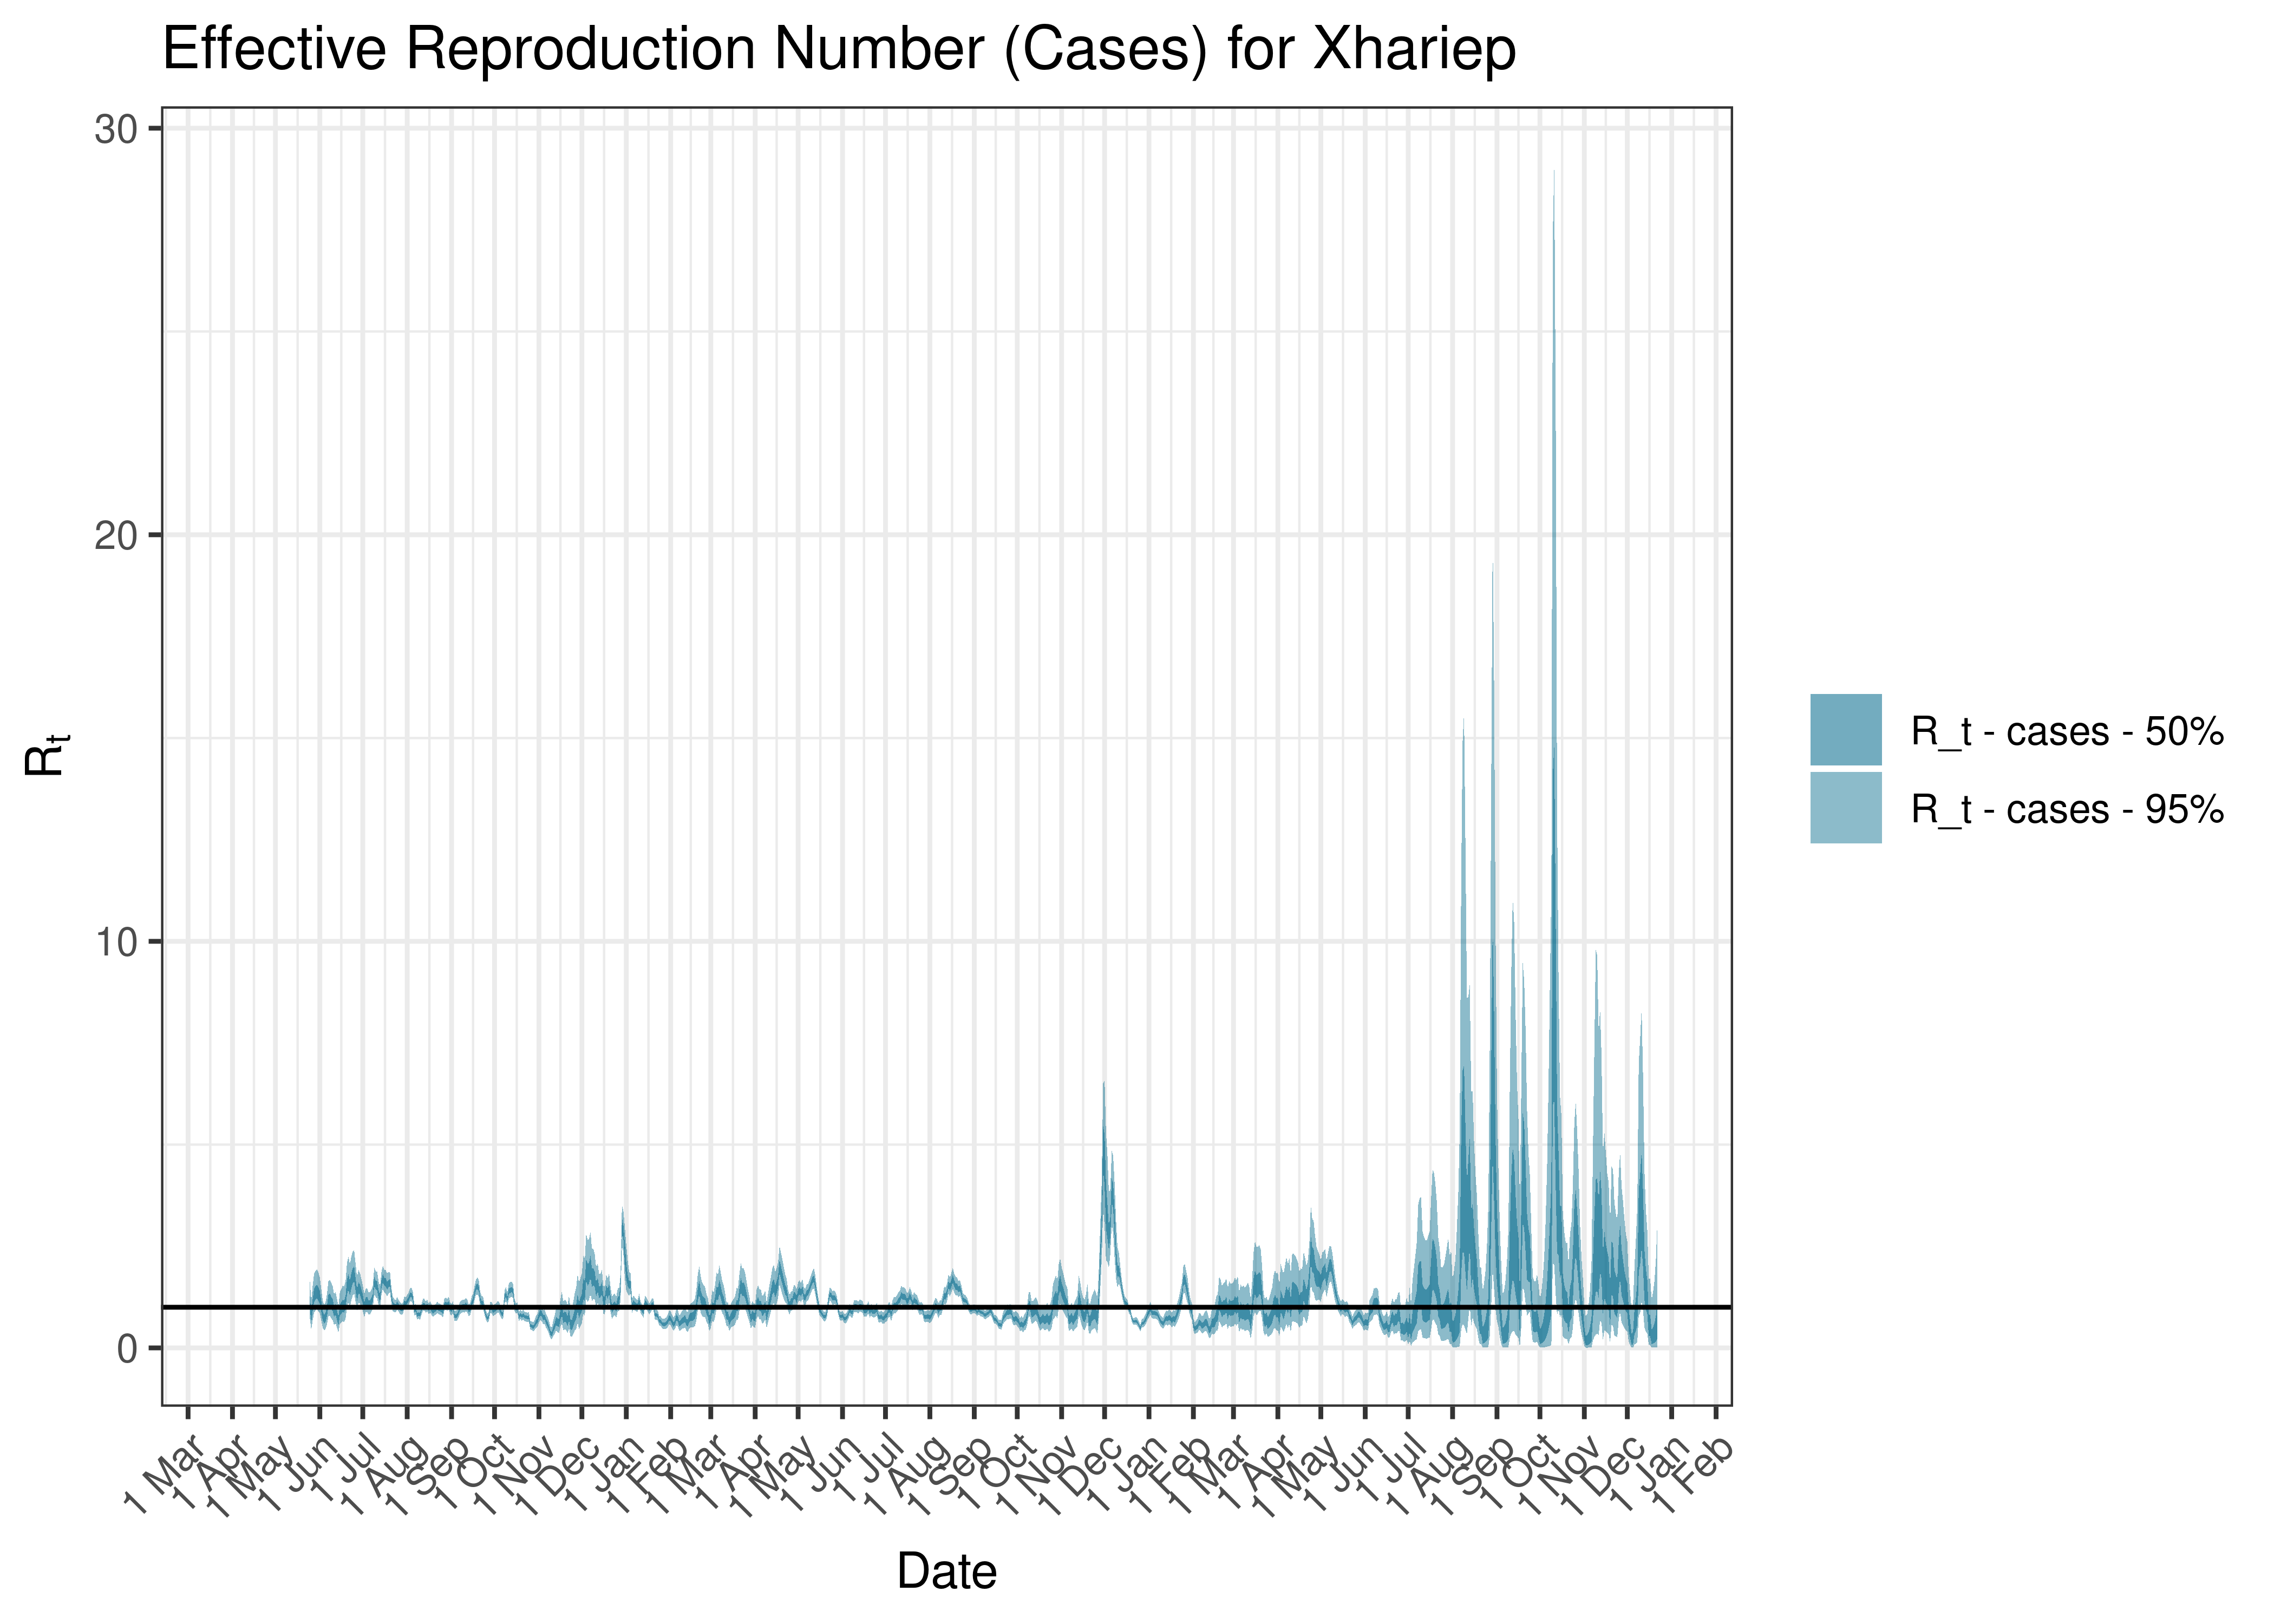 Estimated Effective Reproduction Number Based on Cases for Xhariep since 1 April 2020